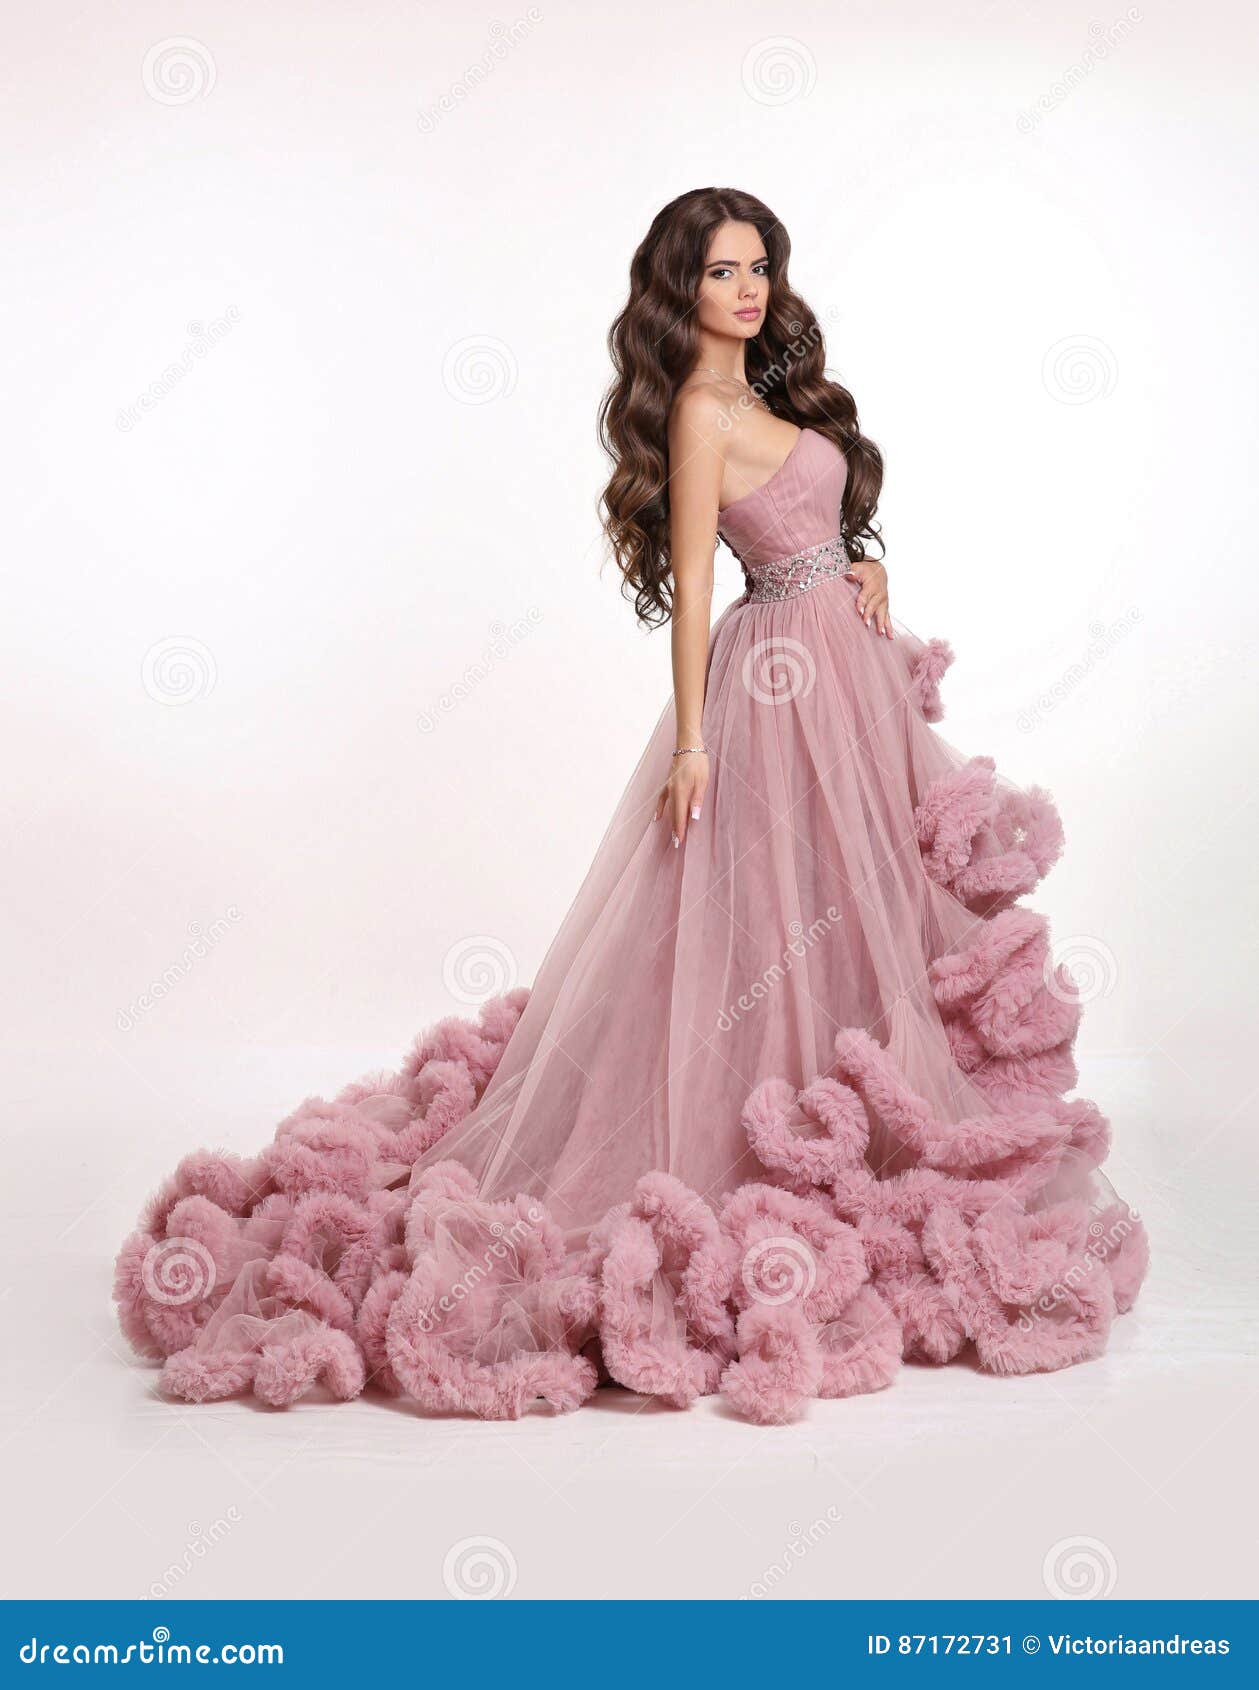 Pink Flower Net princess type Prewedding gown at Rs 3500 | Wedding Gown in  Surat | ID: 2852623619848